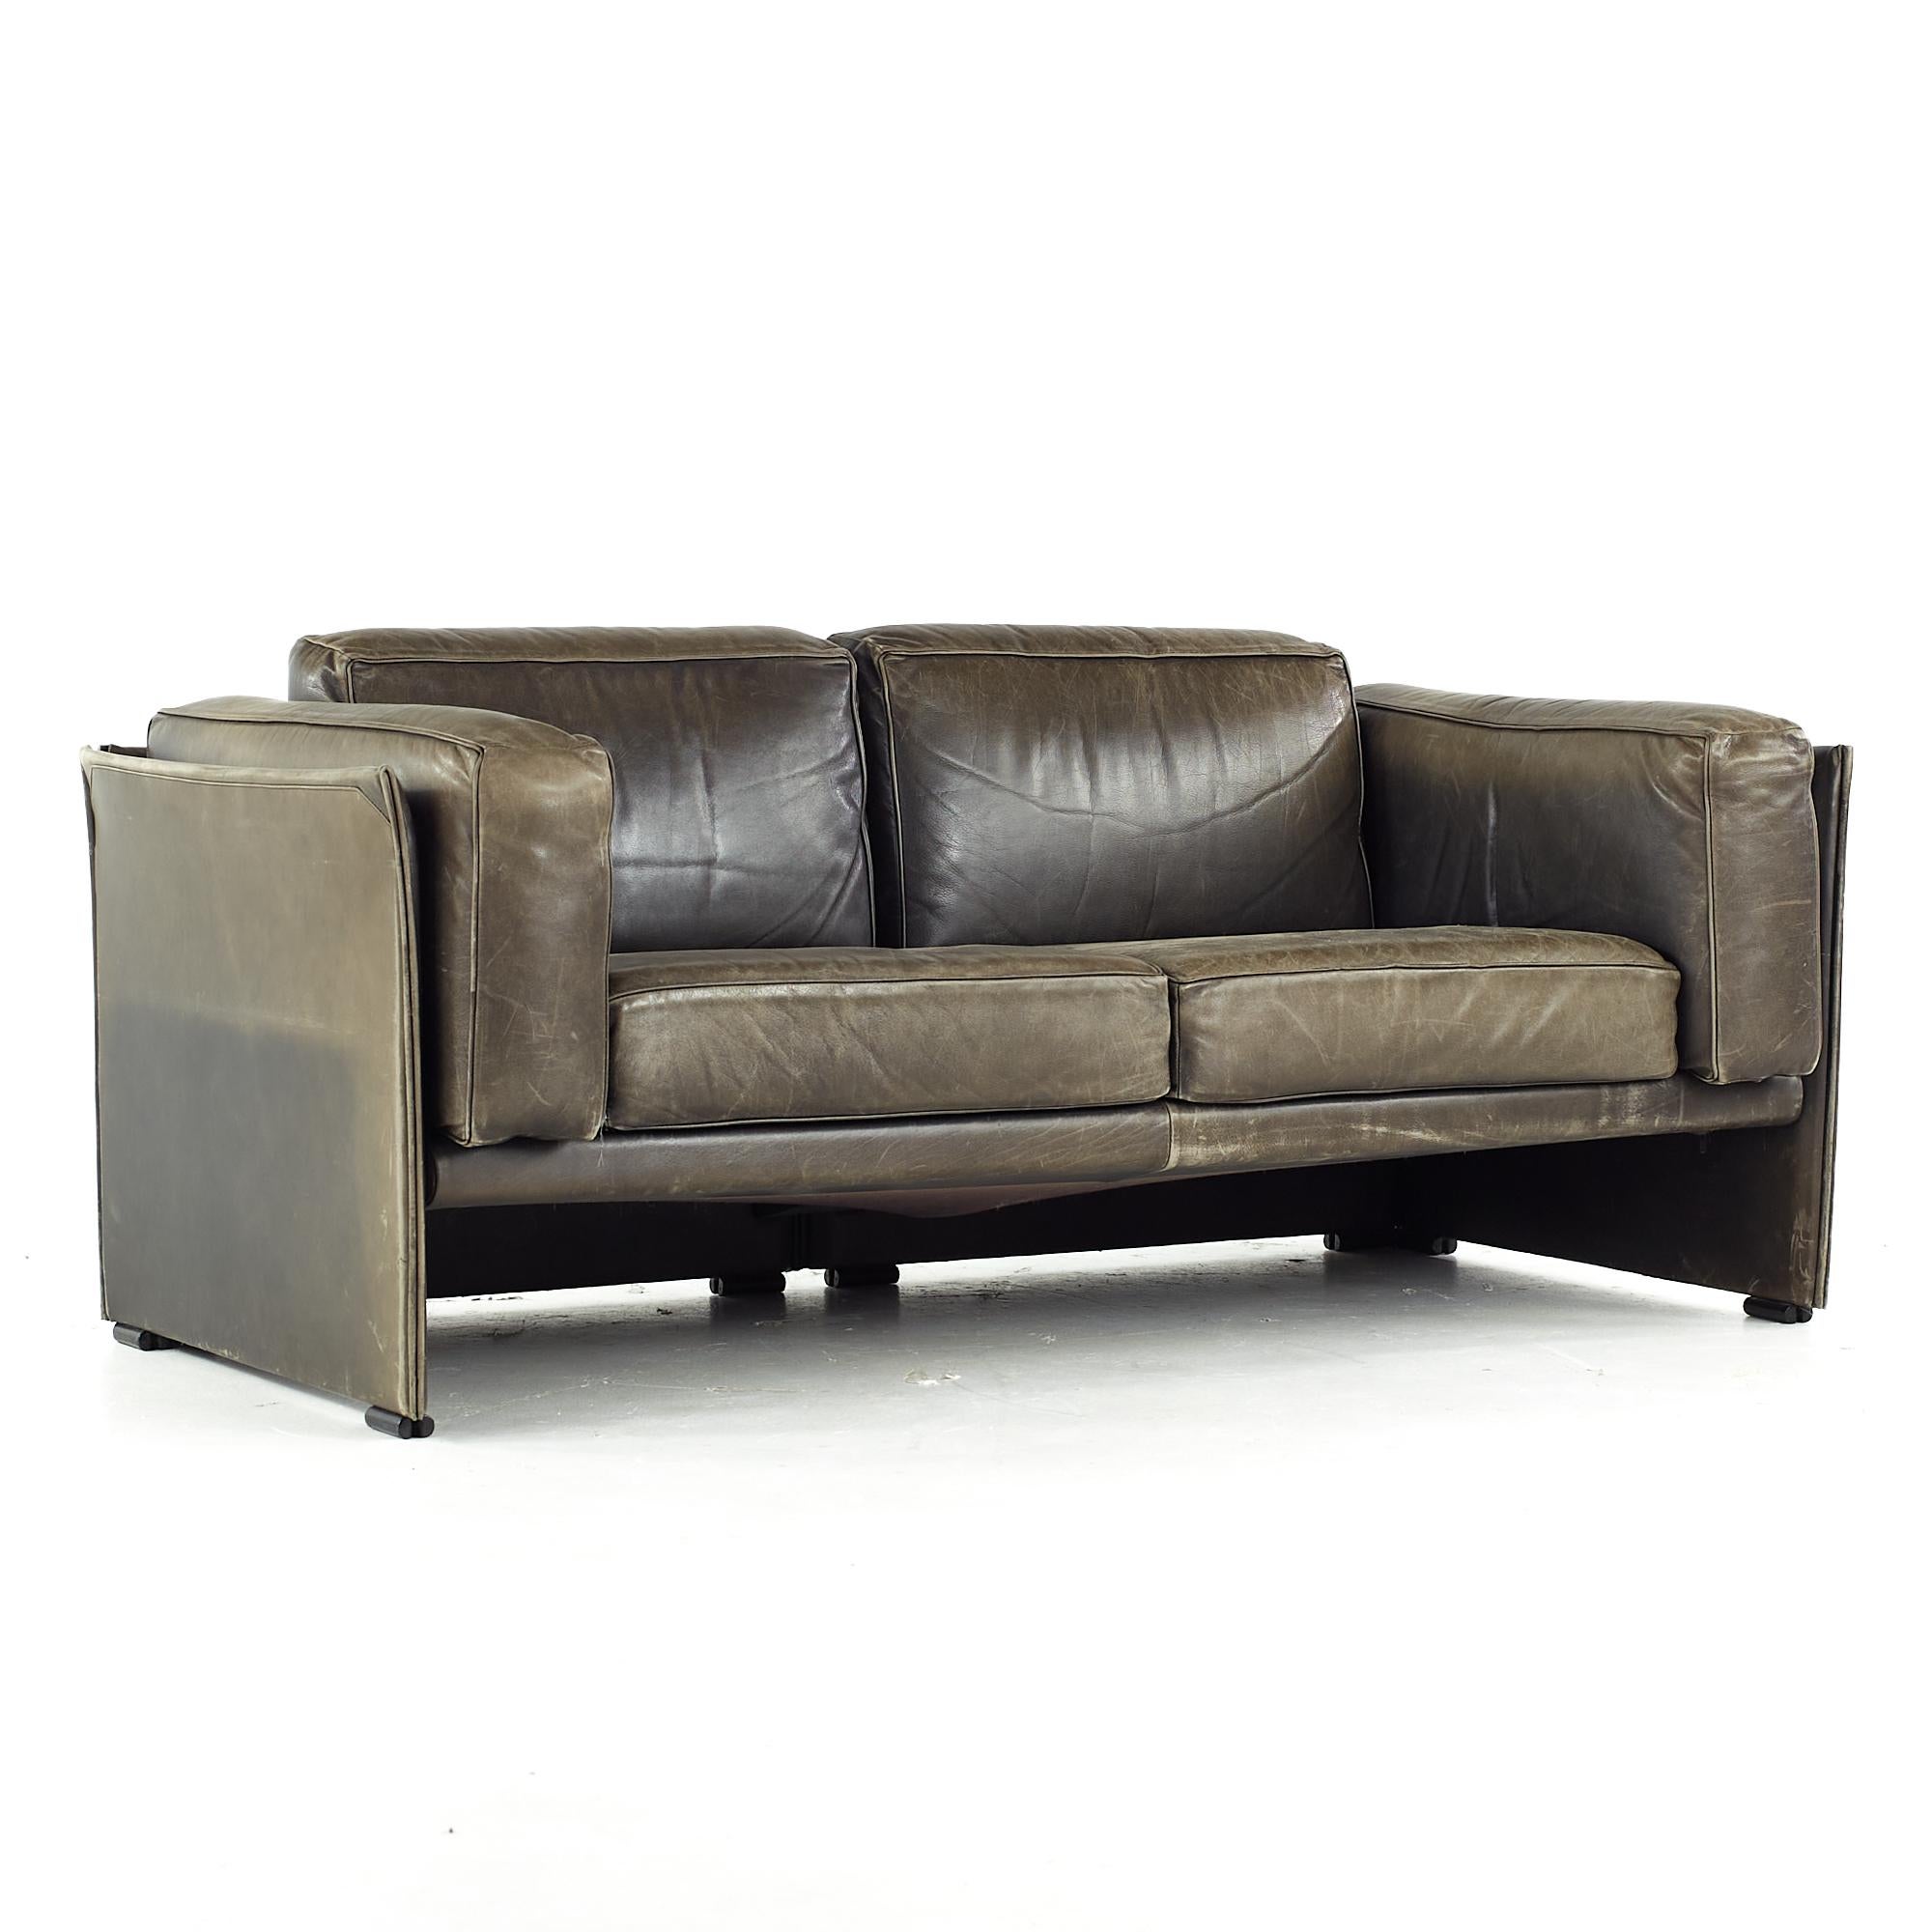 Afra and Tobia Scarpa for Cassina Midcentury Italian Leather Sofas, Pair In Good Condition For Sale In Countryside, IL